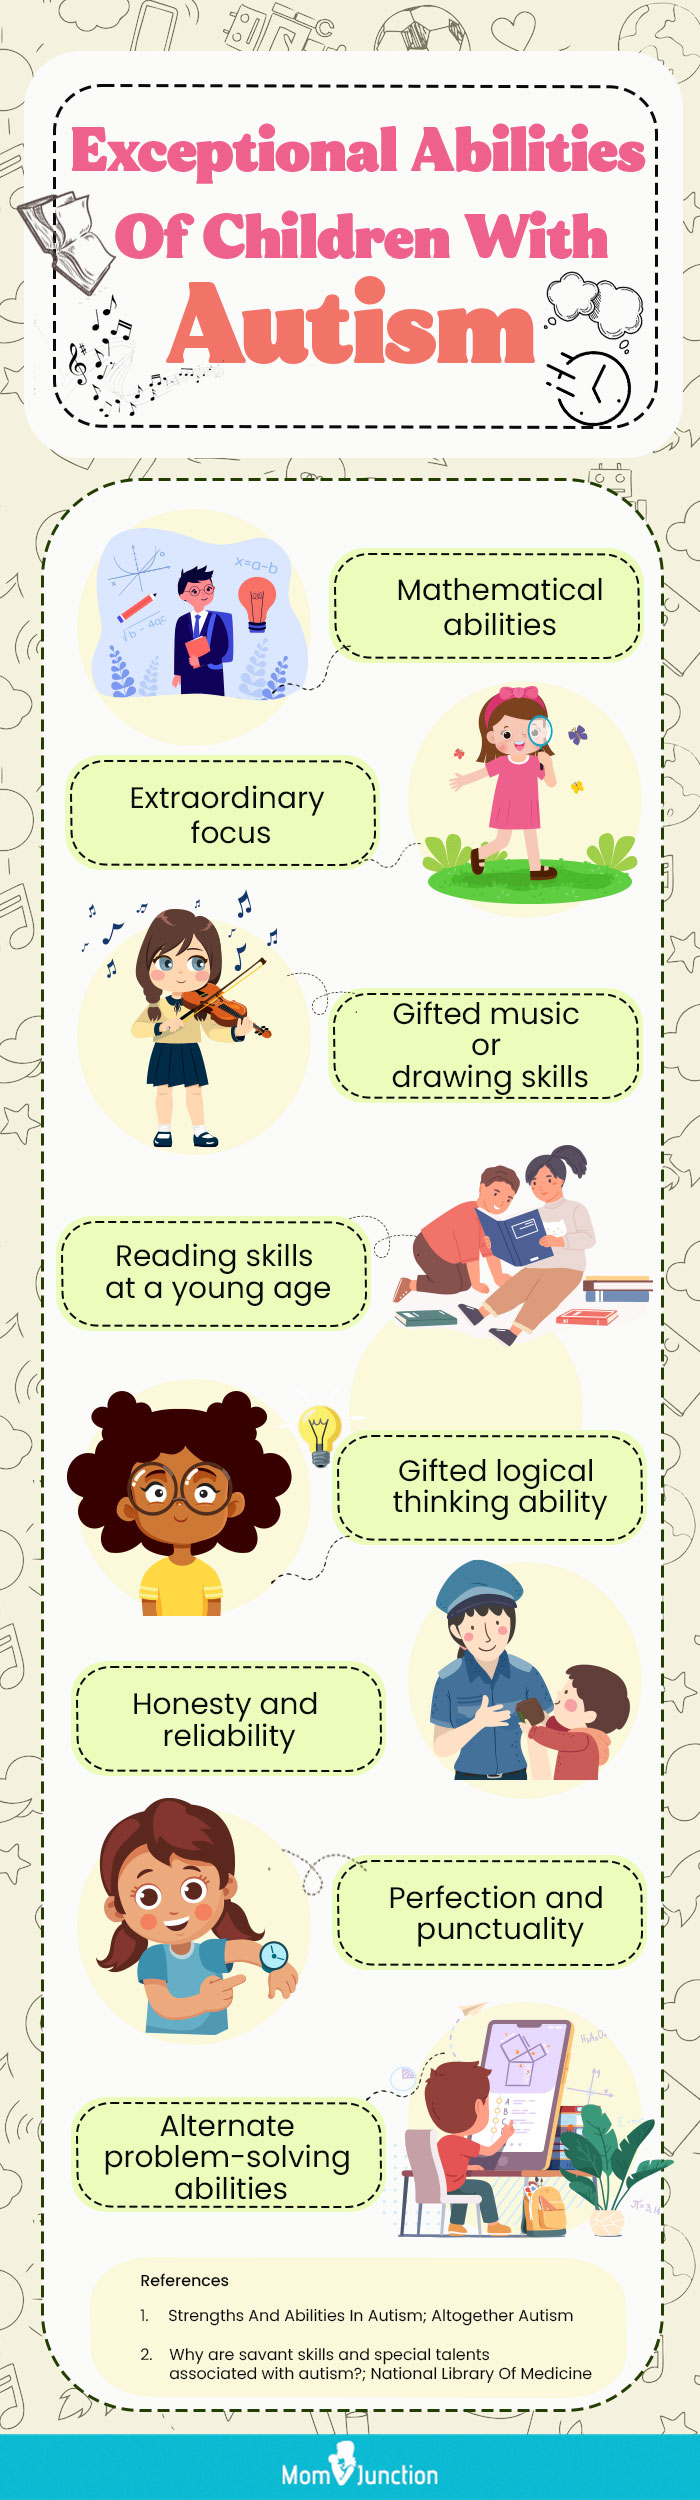 exceptional abilities of children with autism [infographic]